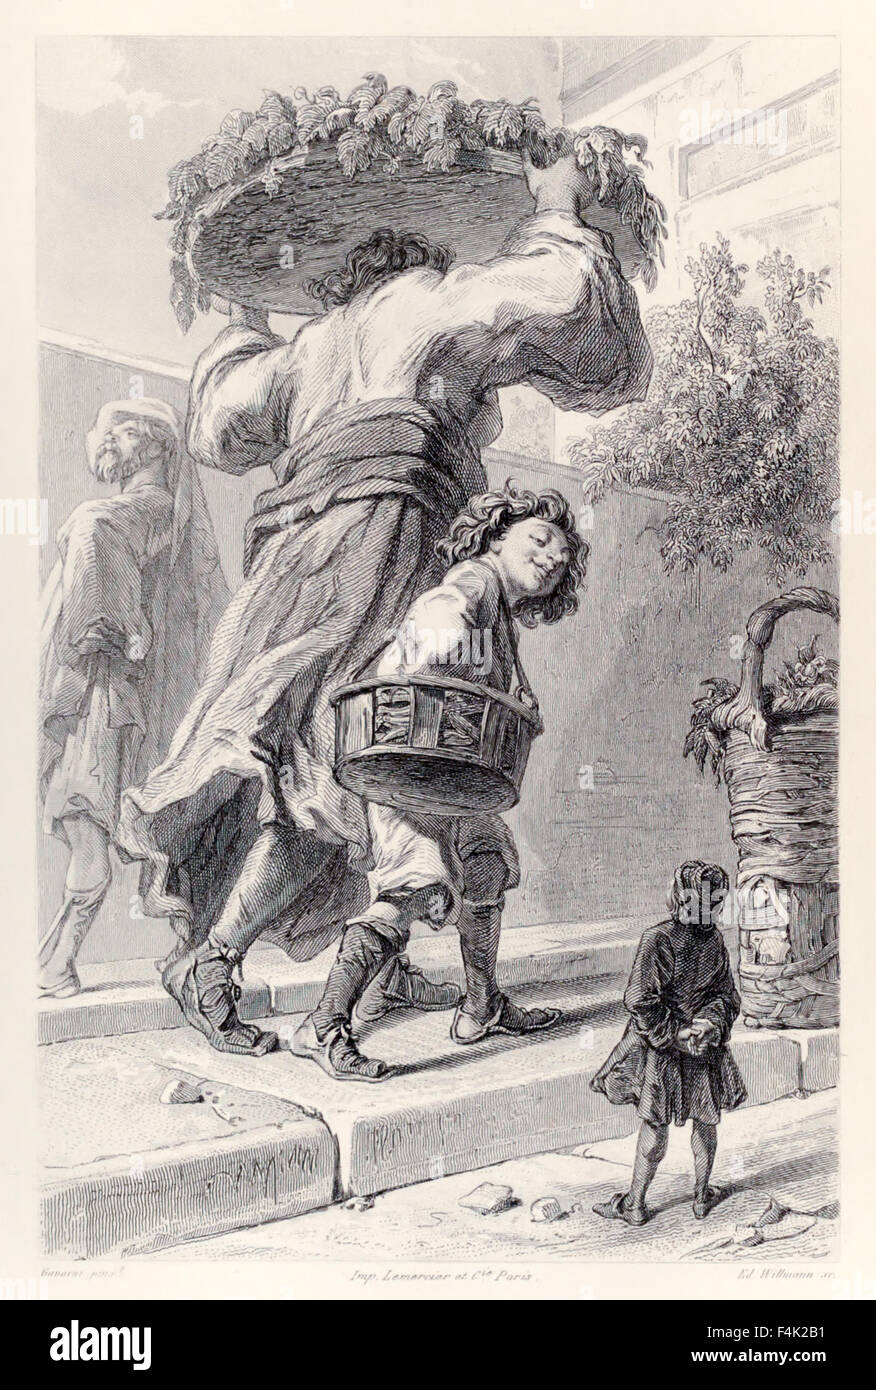 Gulliver and Lordbruldrud, from French Edition of 'Gulliver's Travels' by Jonathan Swift (1667-1745), illustration by Paul Gavarni (1804-1866). See description for more information. Stock Photo